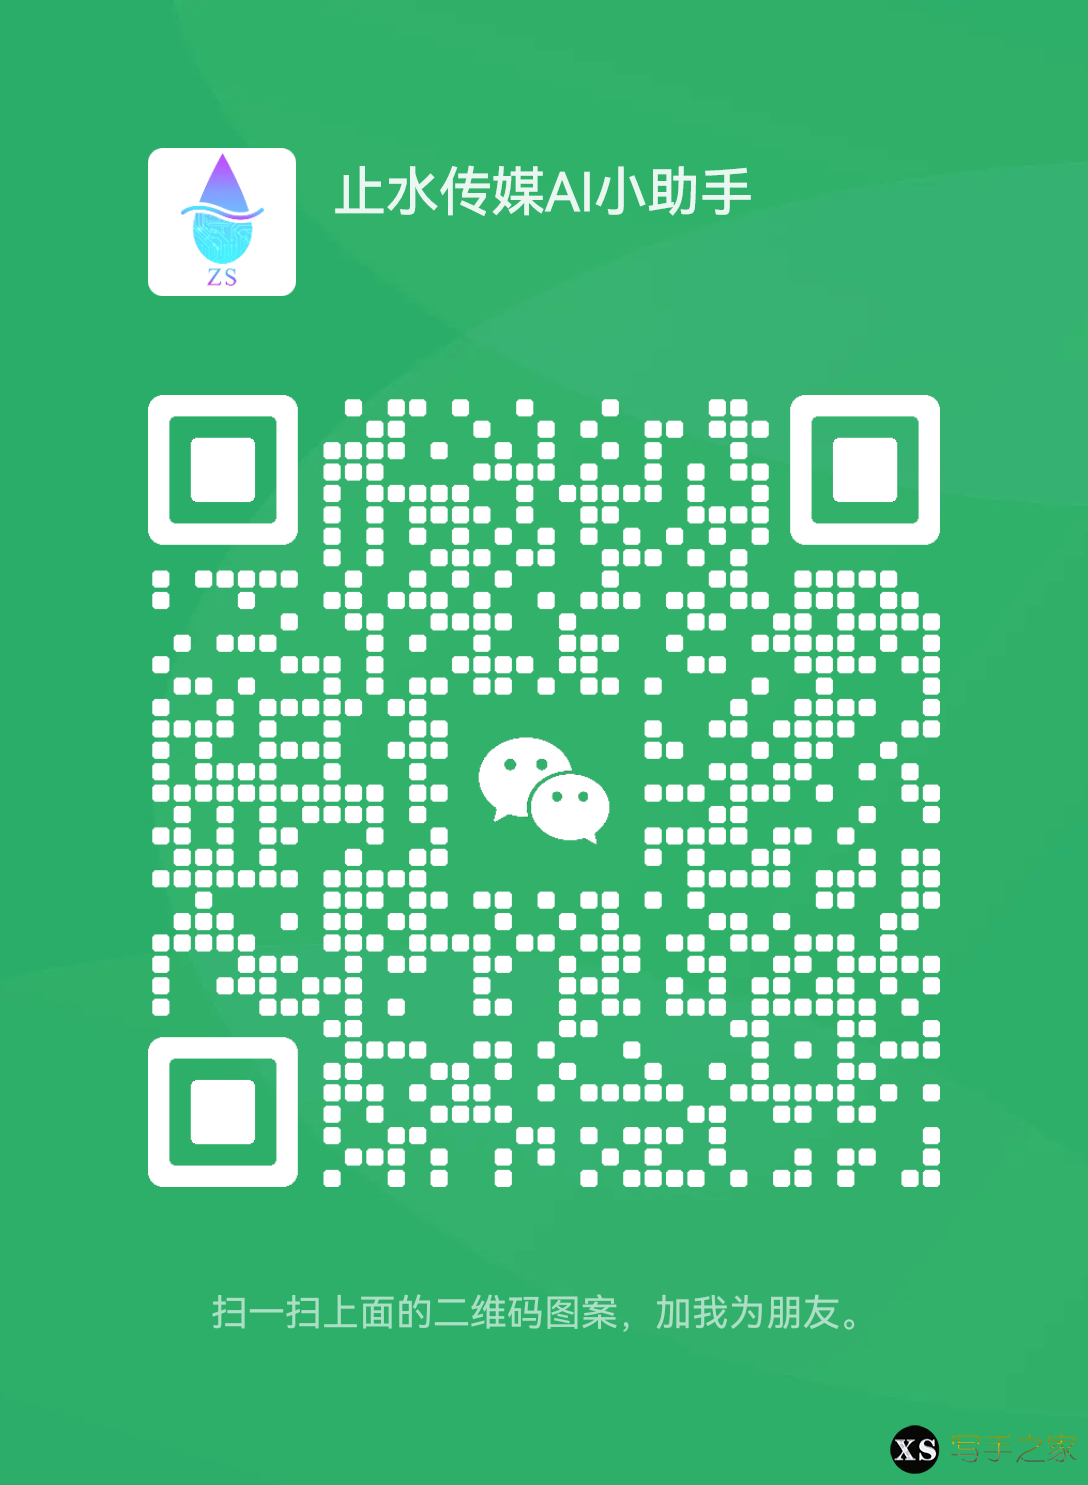 mmqrcode1687934184918.png